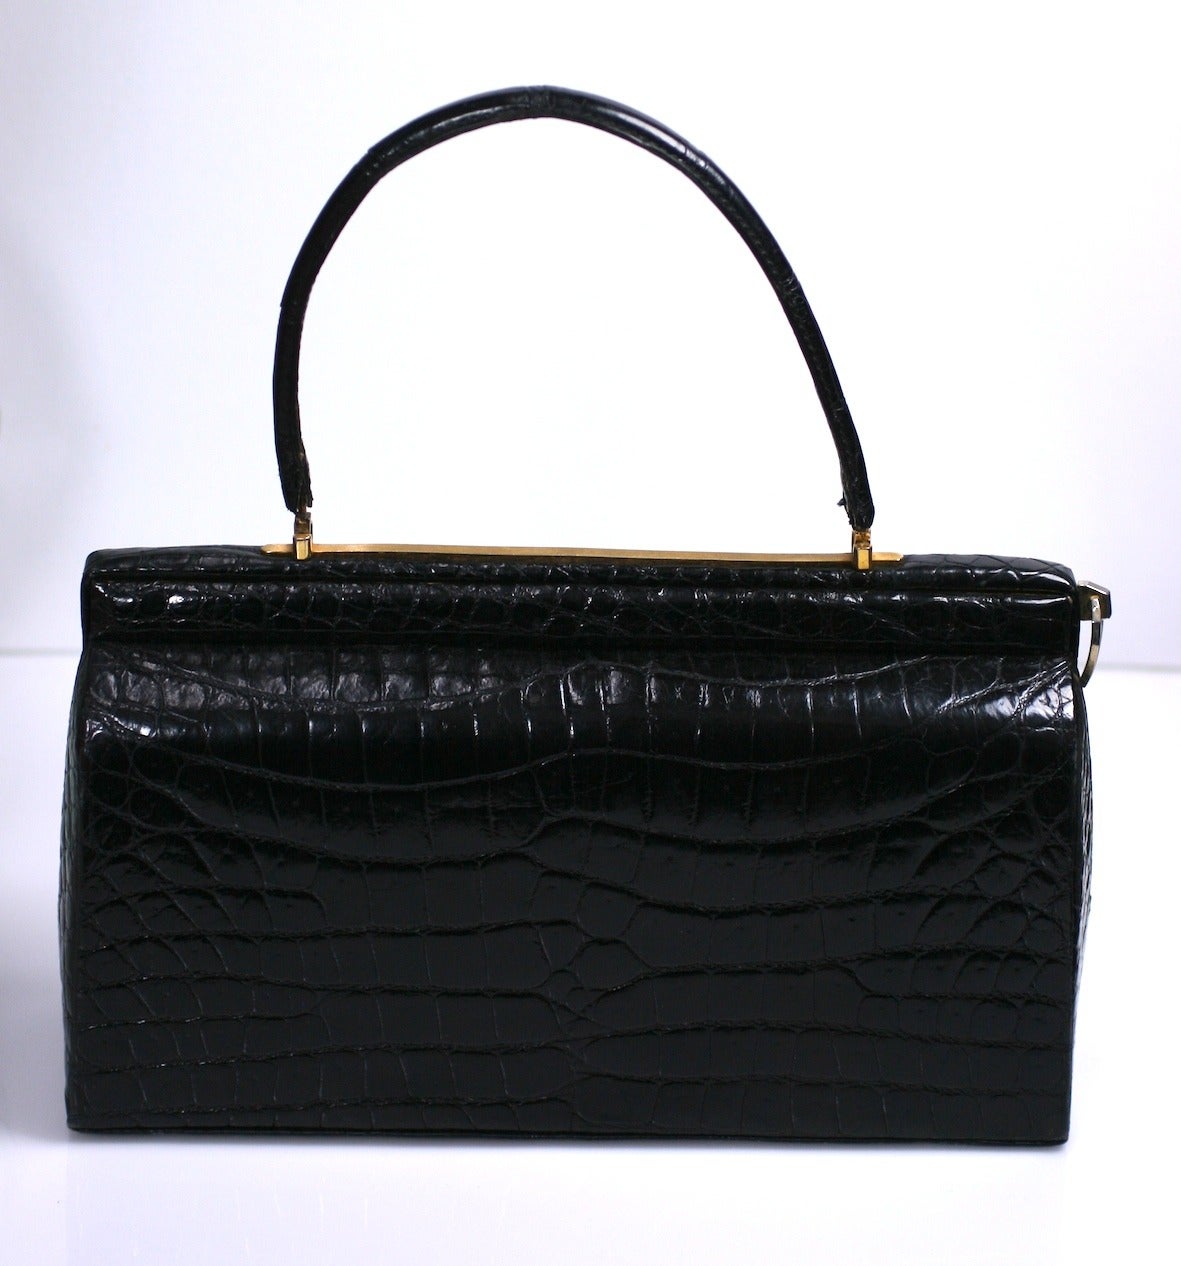 Elegant 1950's French alligator bag of elongated form with unusual pull tab access.
Pulling the decorative tab at end of frame unlocks mechanism. Frame can then be snapped shut manually. 
Attractive rectangular form is timeless and roomy. 1950's